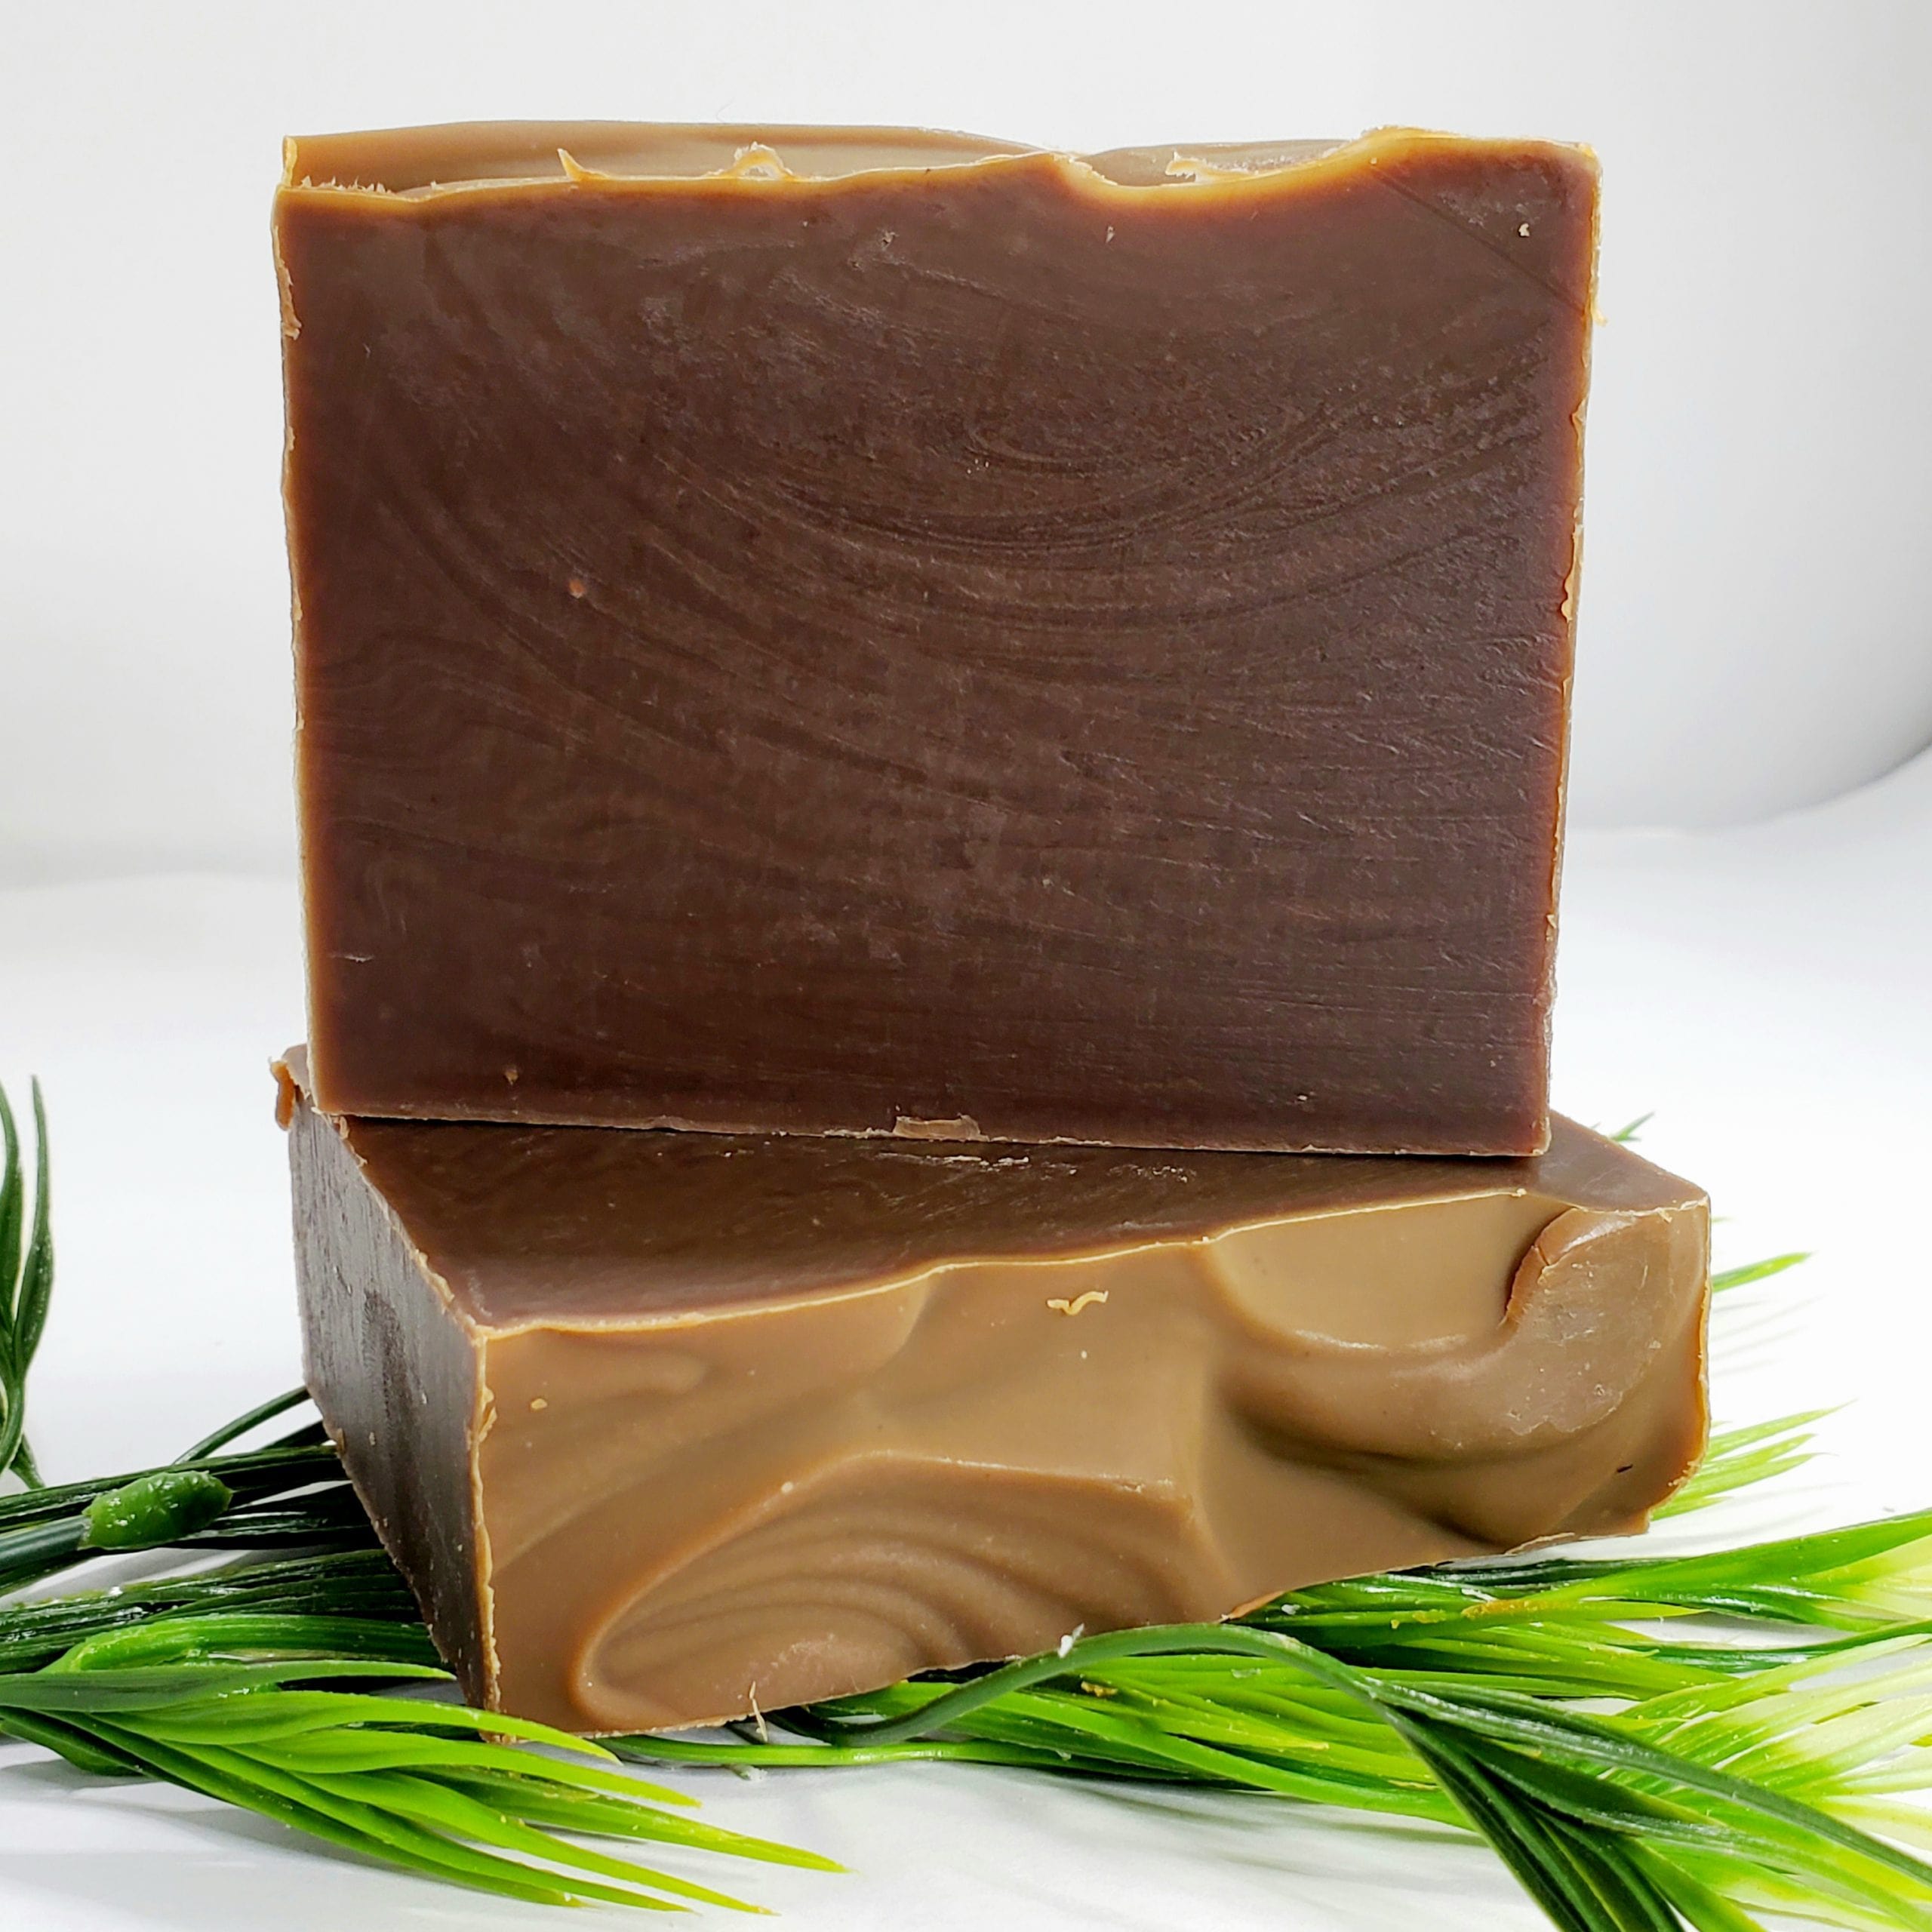 Pine Tar Soap Bar - Diana's Candles and Soaps 